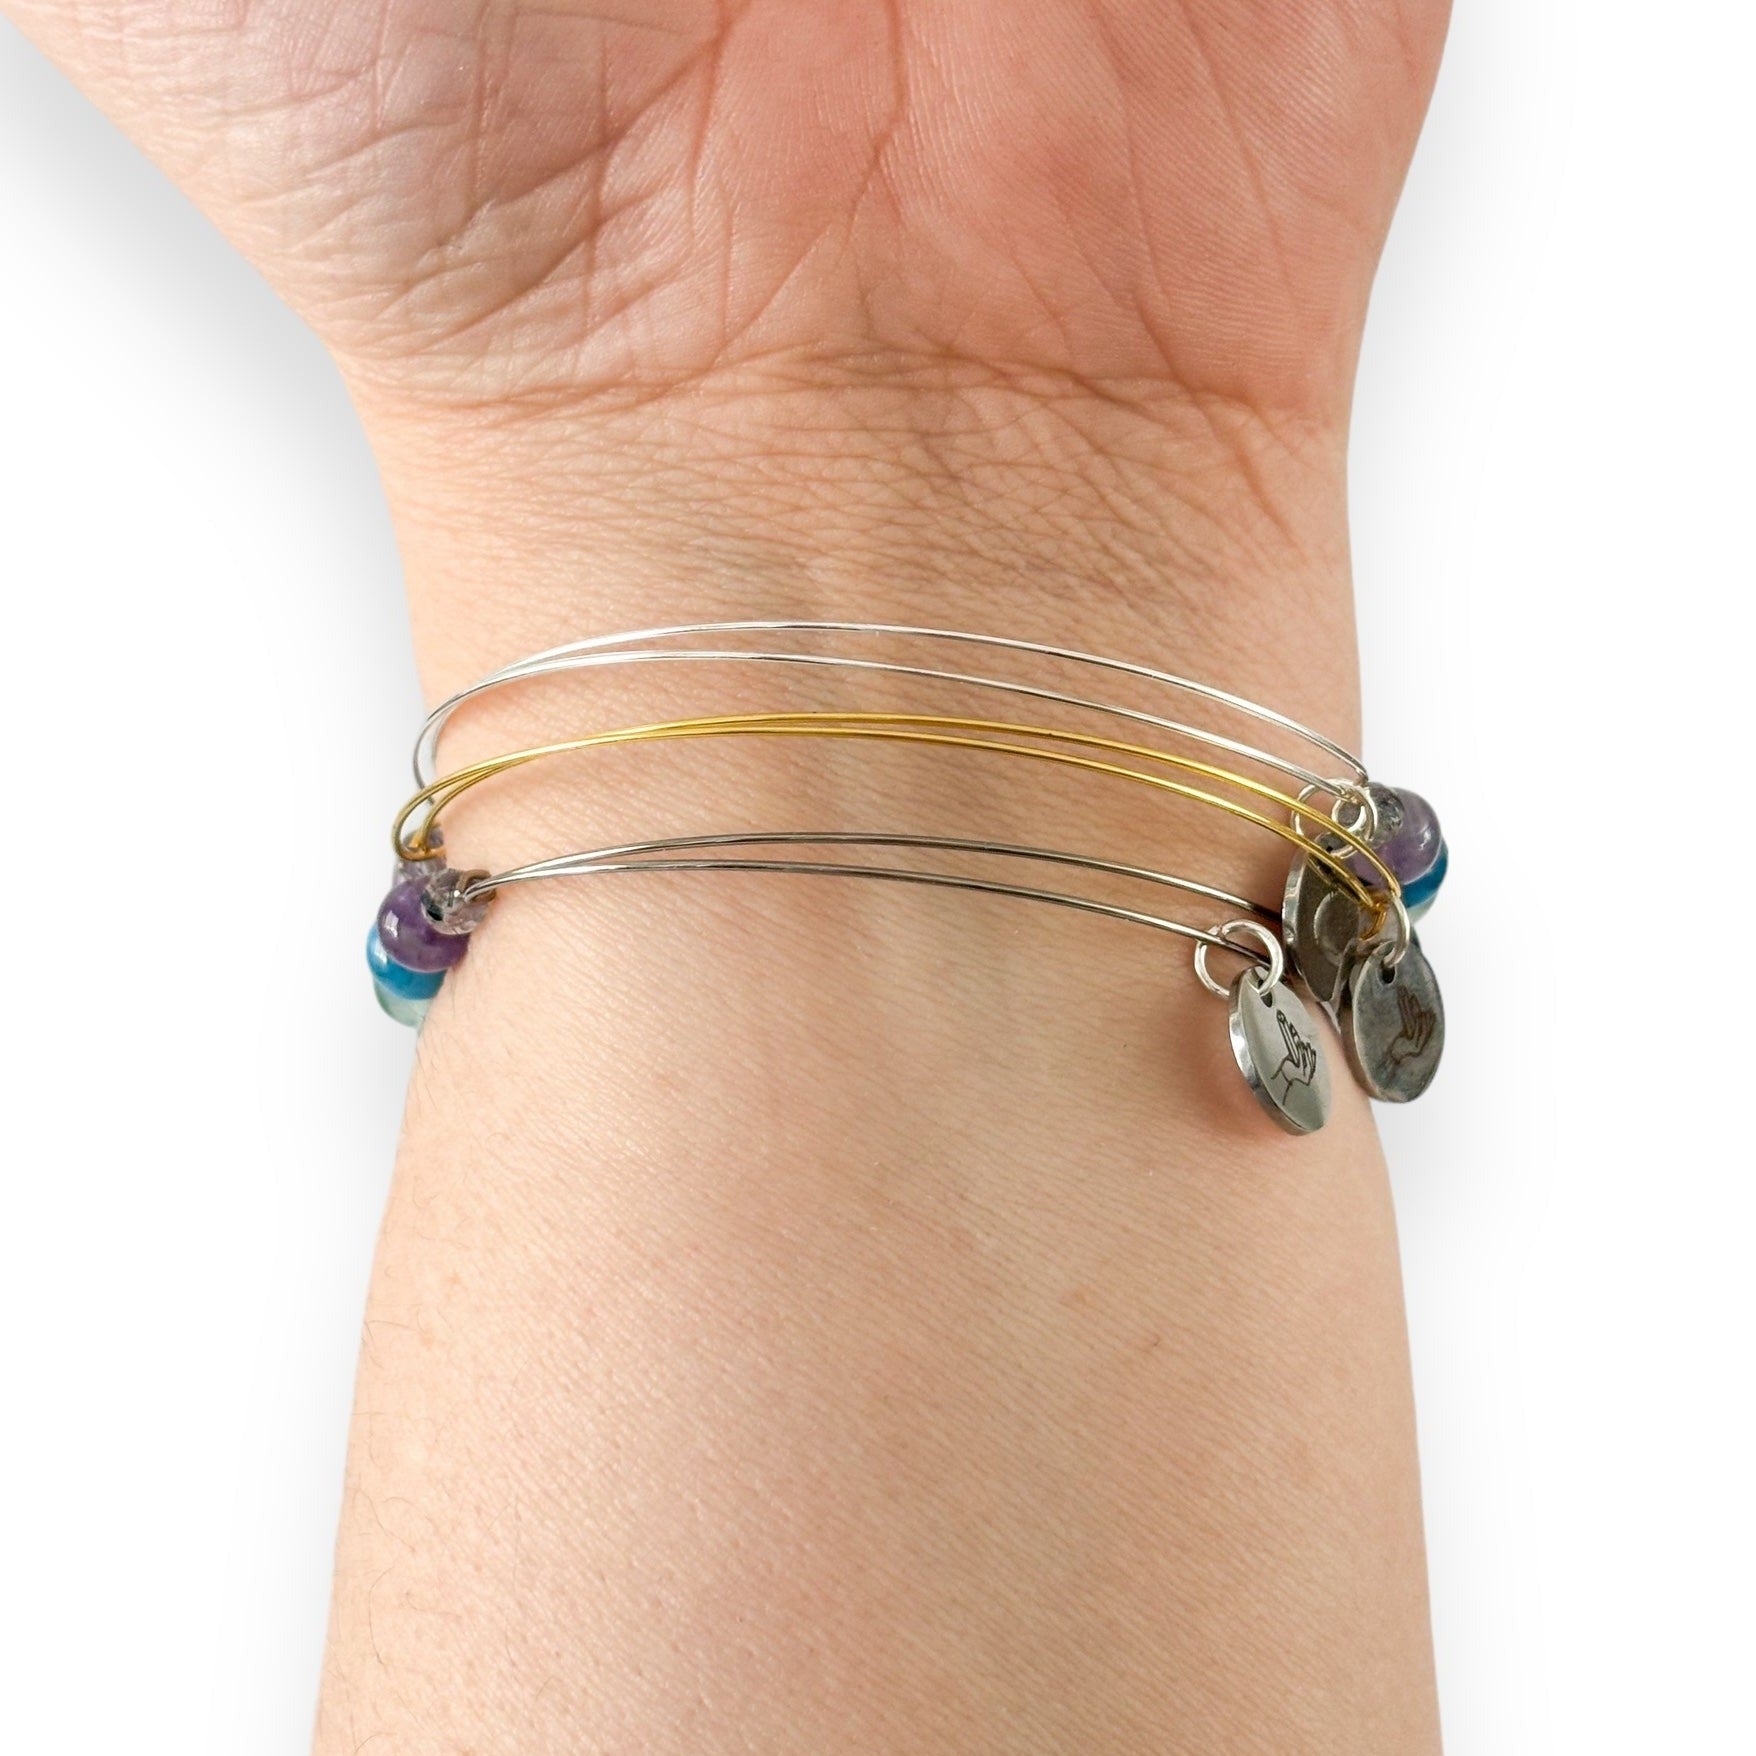 Serenity Wrap Bracelet as a perfect mindfulness gift